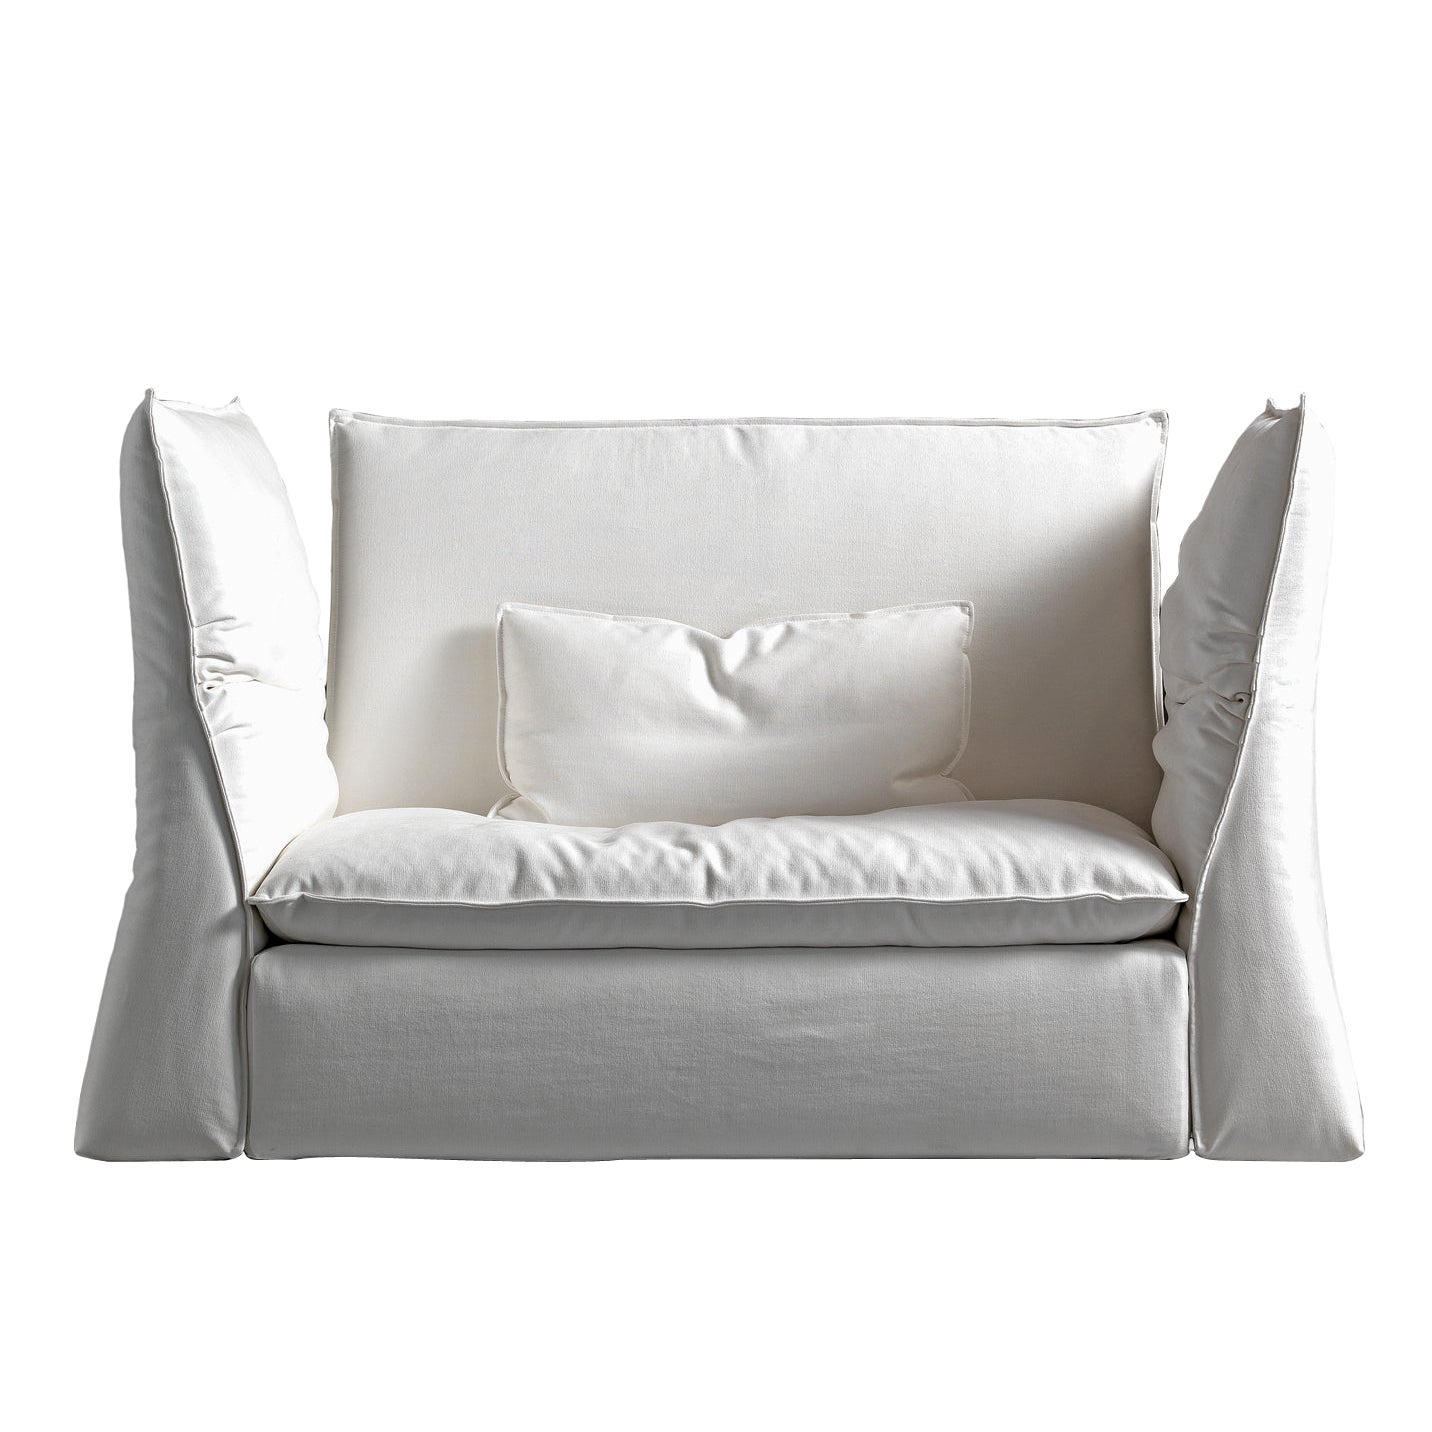 Les Femmes Large Armchair in Byblos White Upholstery by Giuseppe Viganò